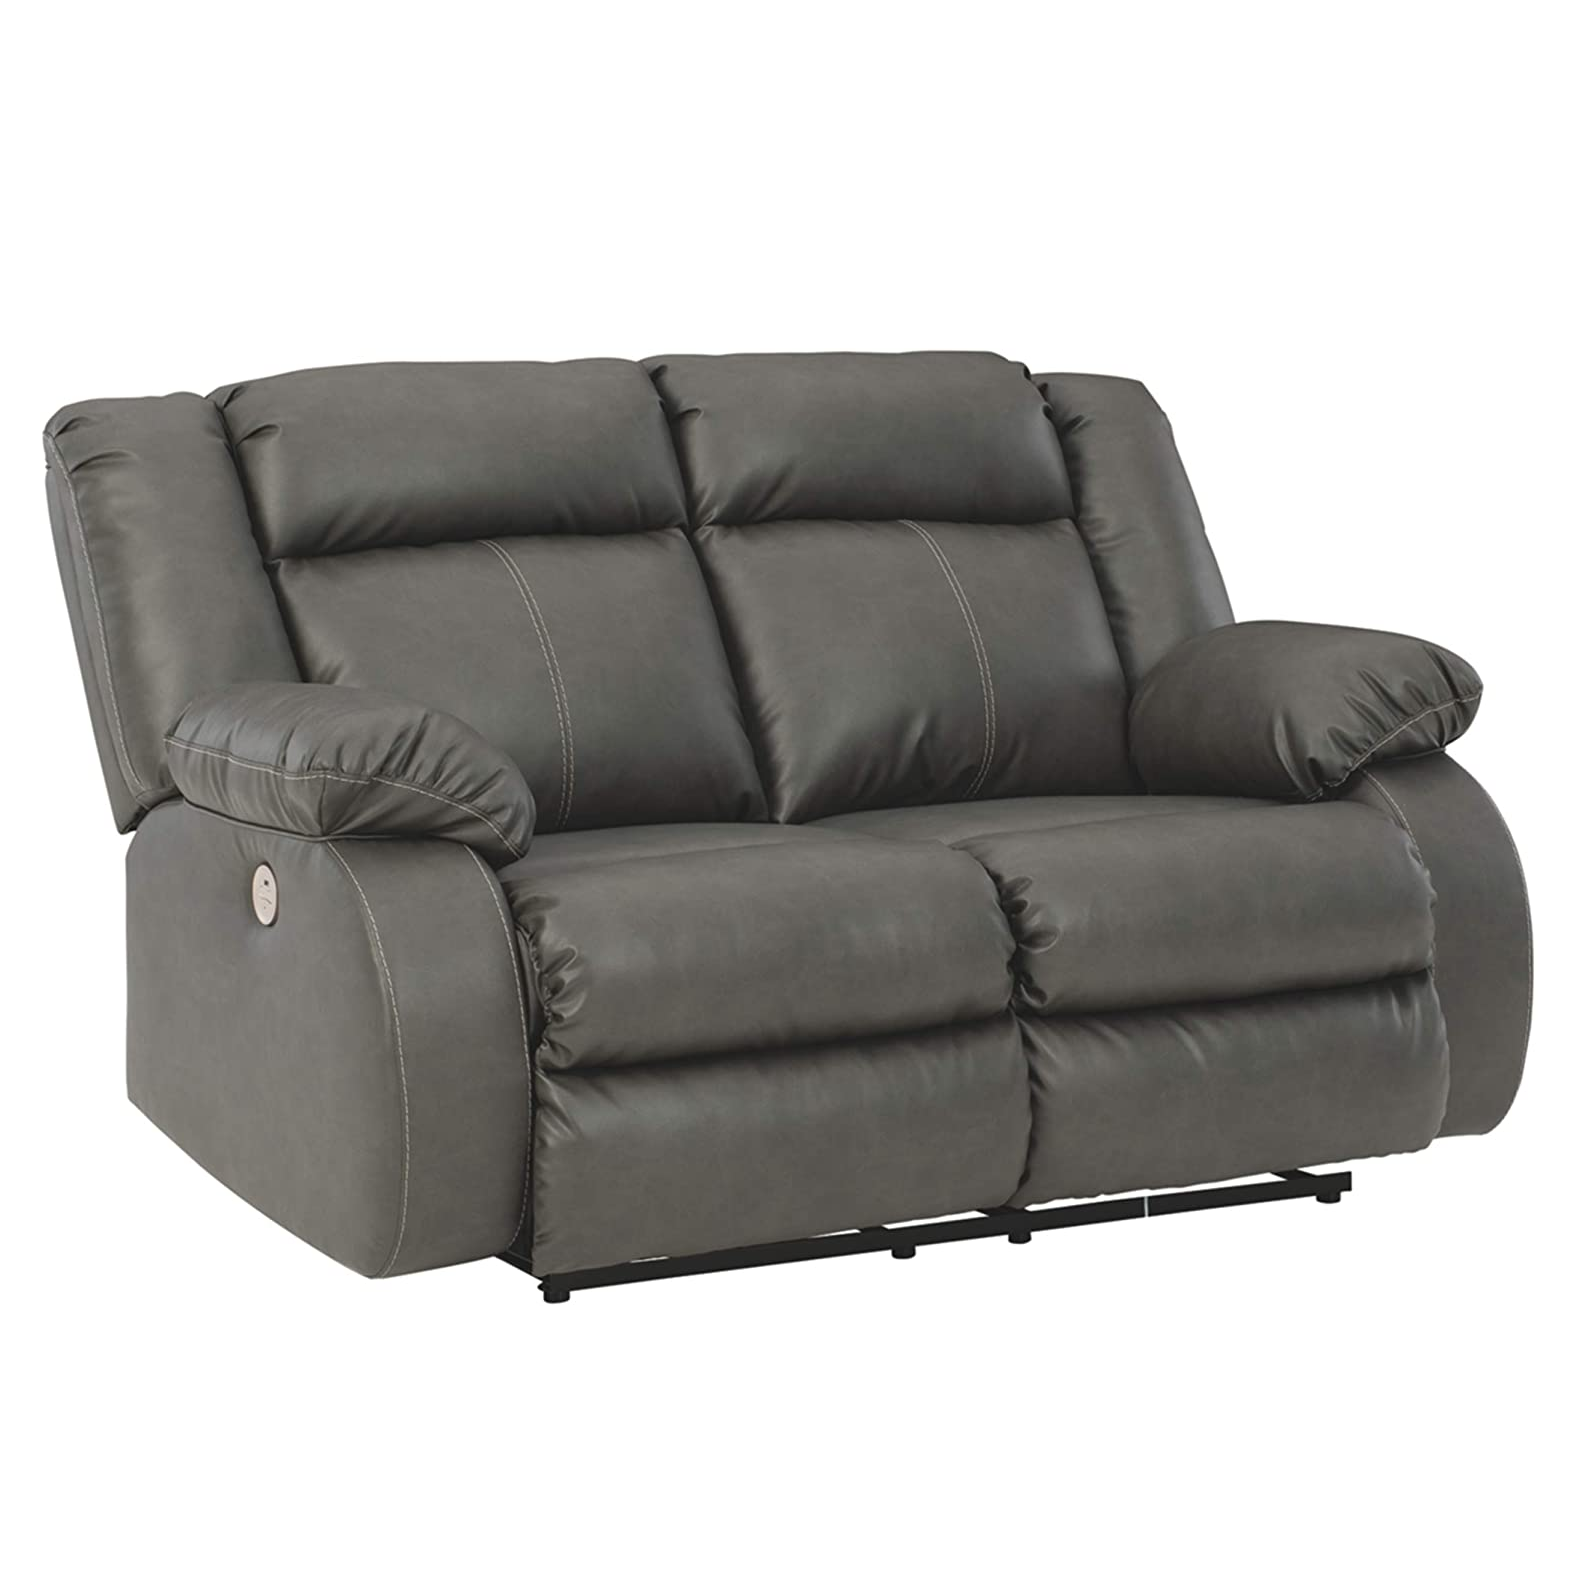 Black Leather Electric Recliner Pricelist –  2 Seater Recliner Sofa – JKY